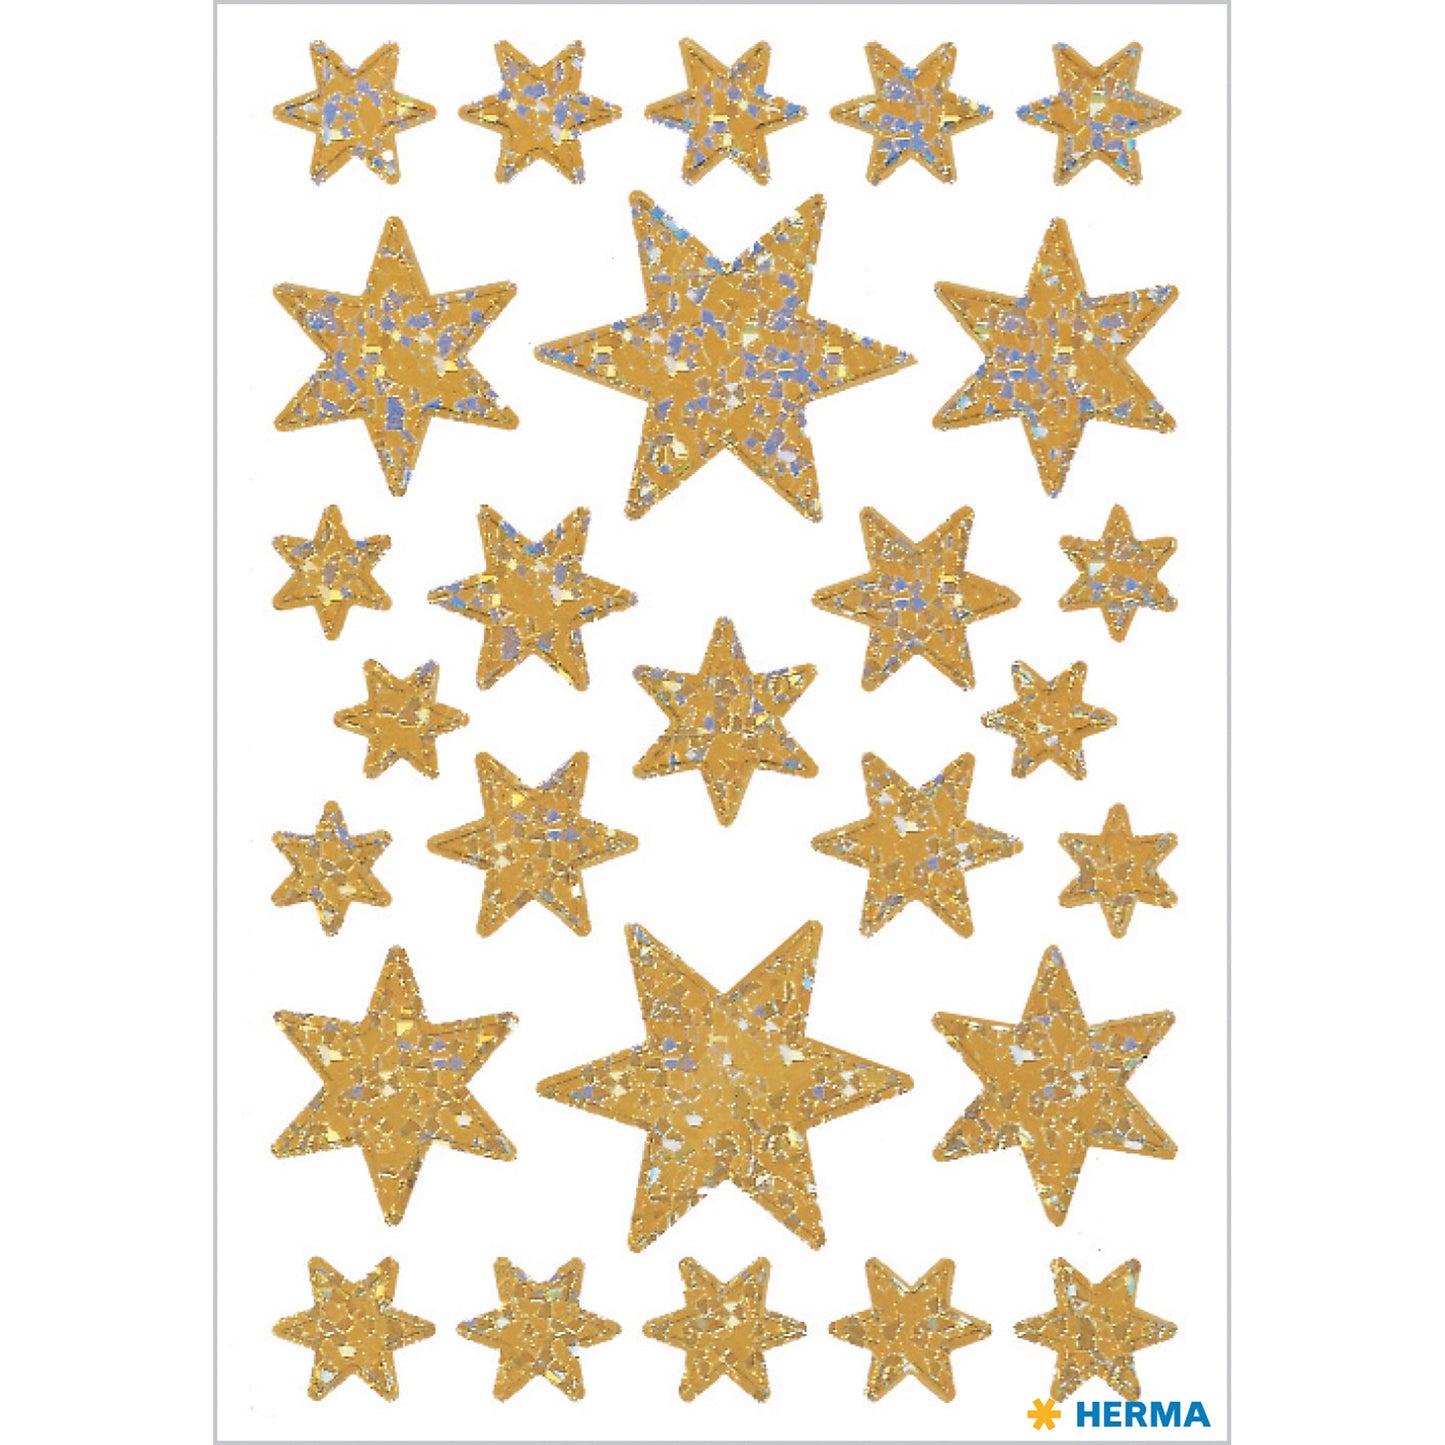 Stickers stars 6-pointed, Gold pearlized film (3916)